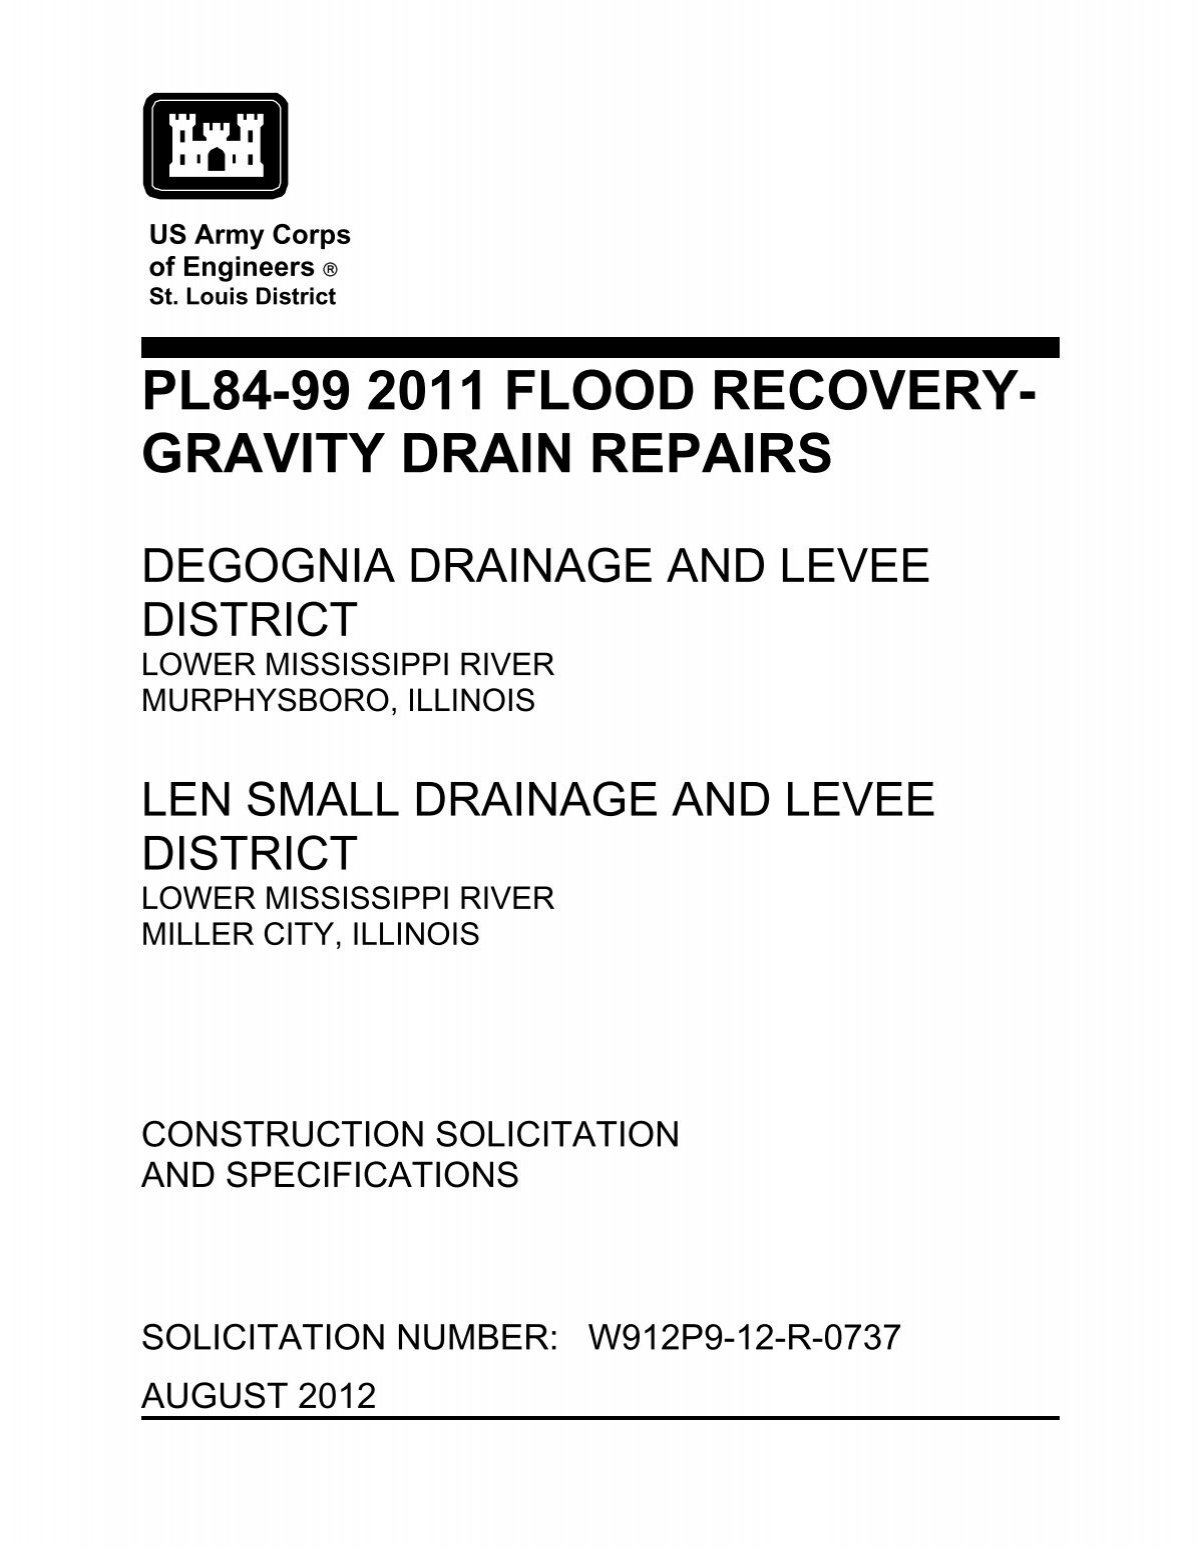 pl84-99 2011 flood recovery- gravity drain repairs - US Army Corps